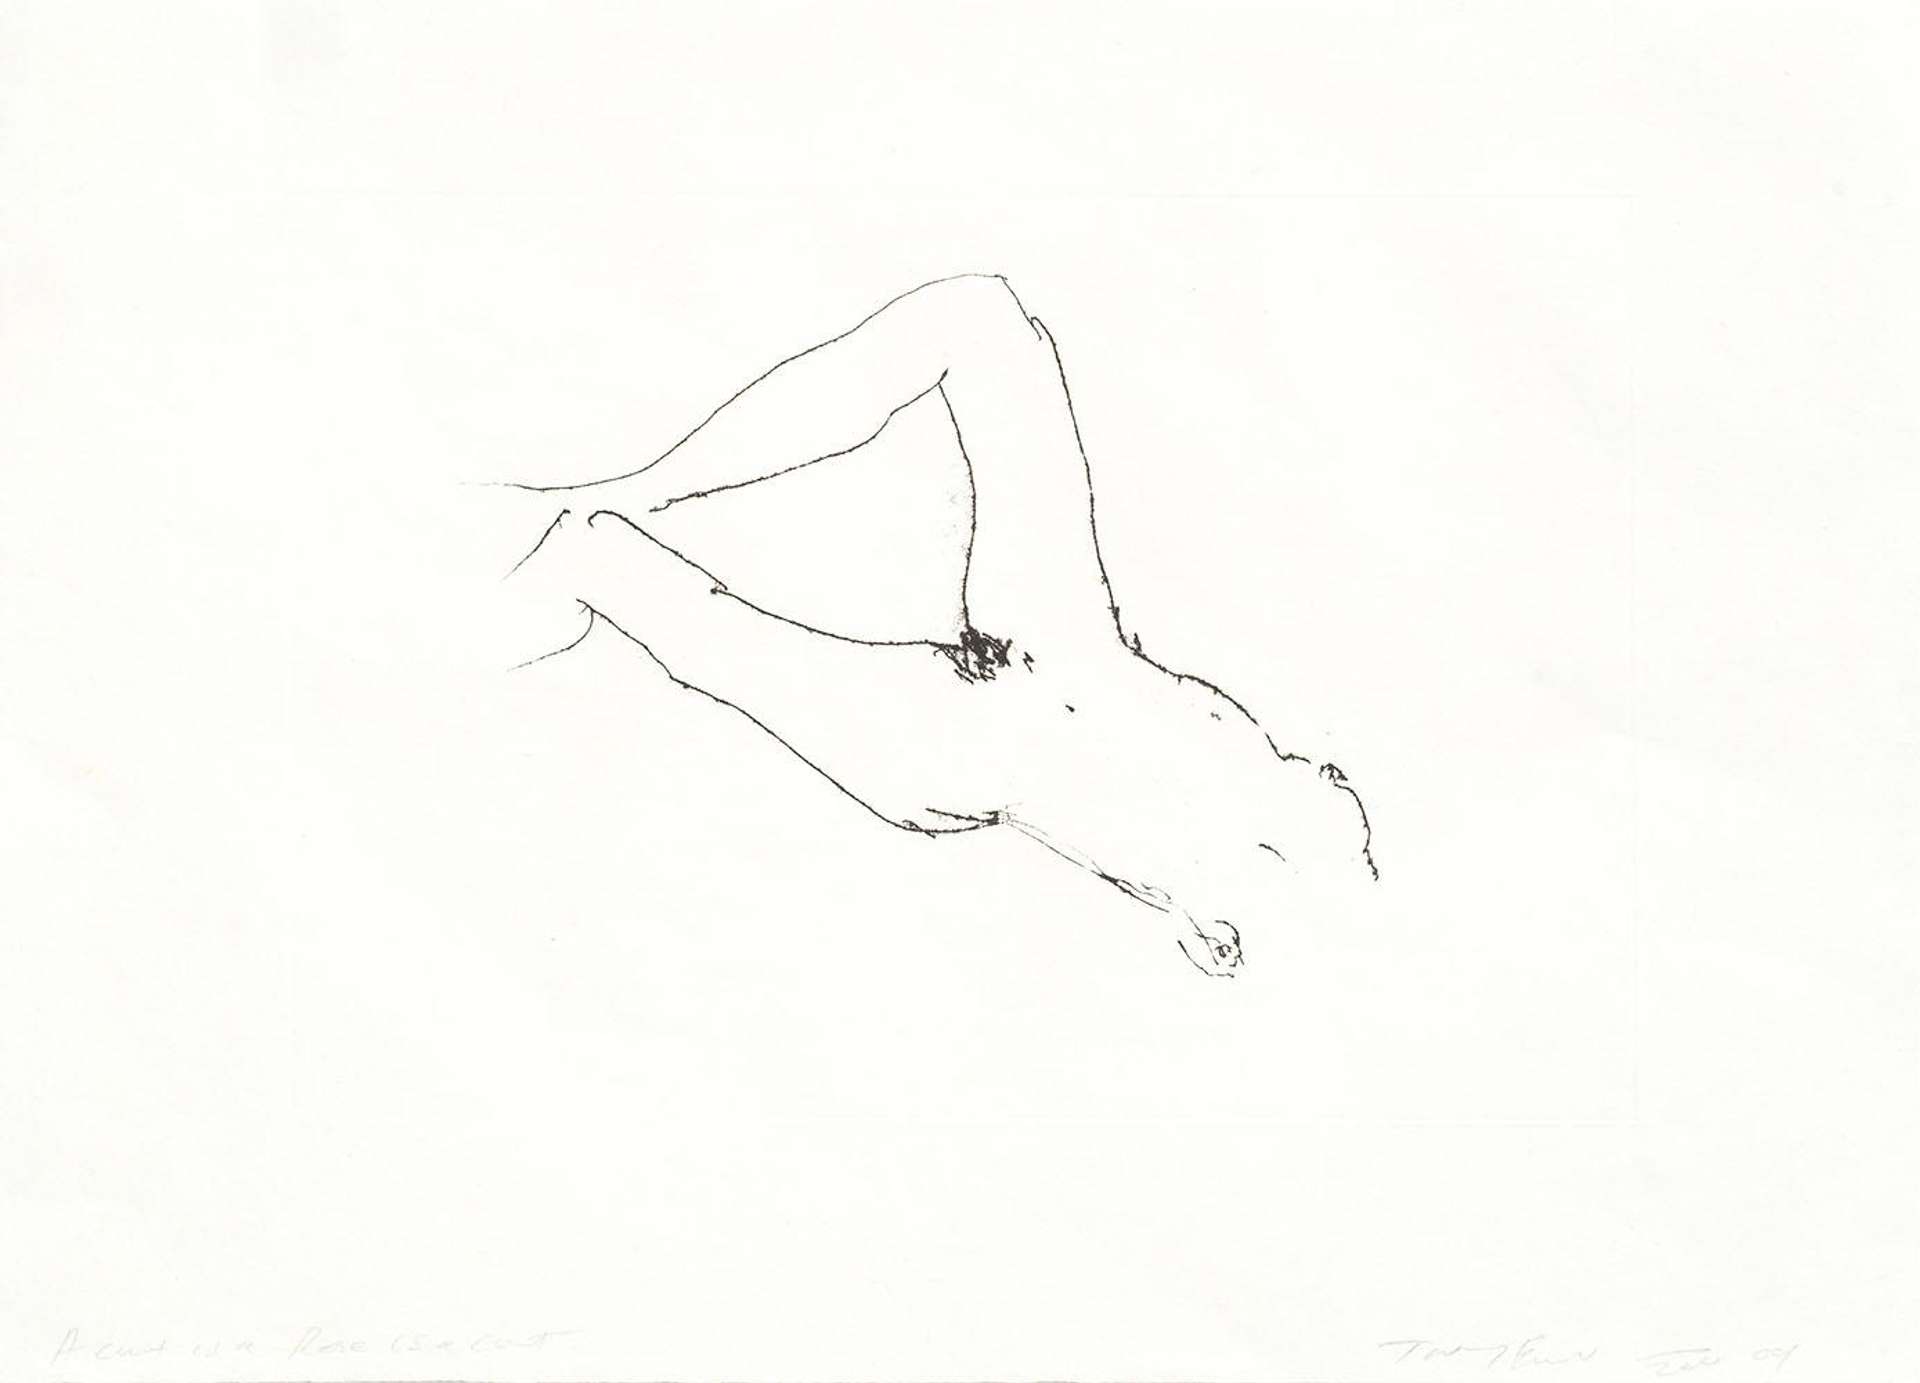 An etching by Tracey Emin depicting woman’s torso and pelvis, with the bottom of her legs and head omitted.